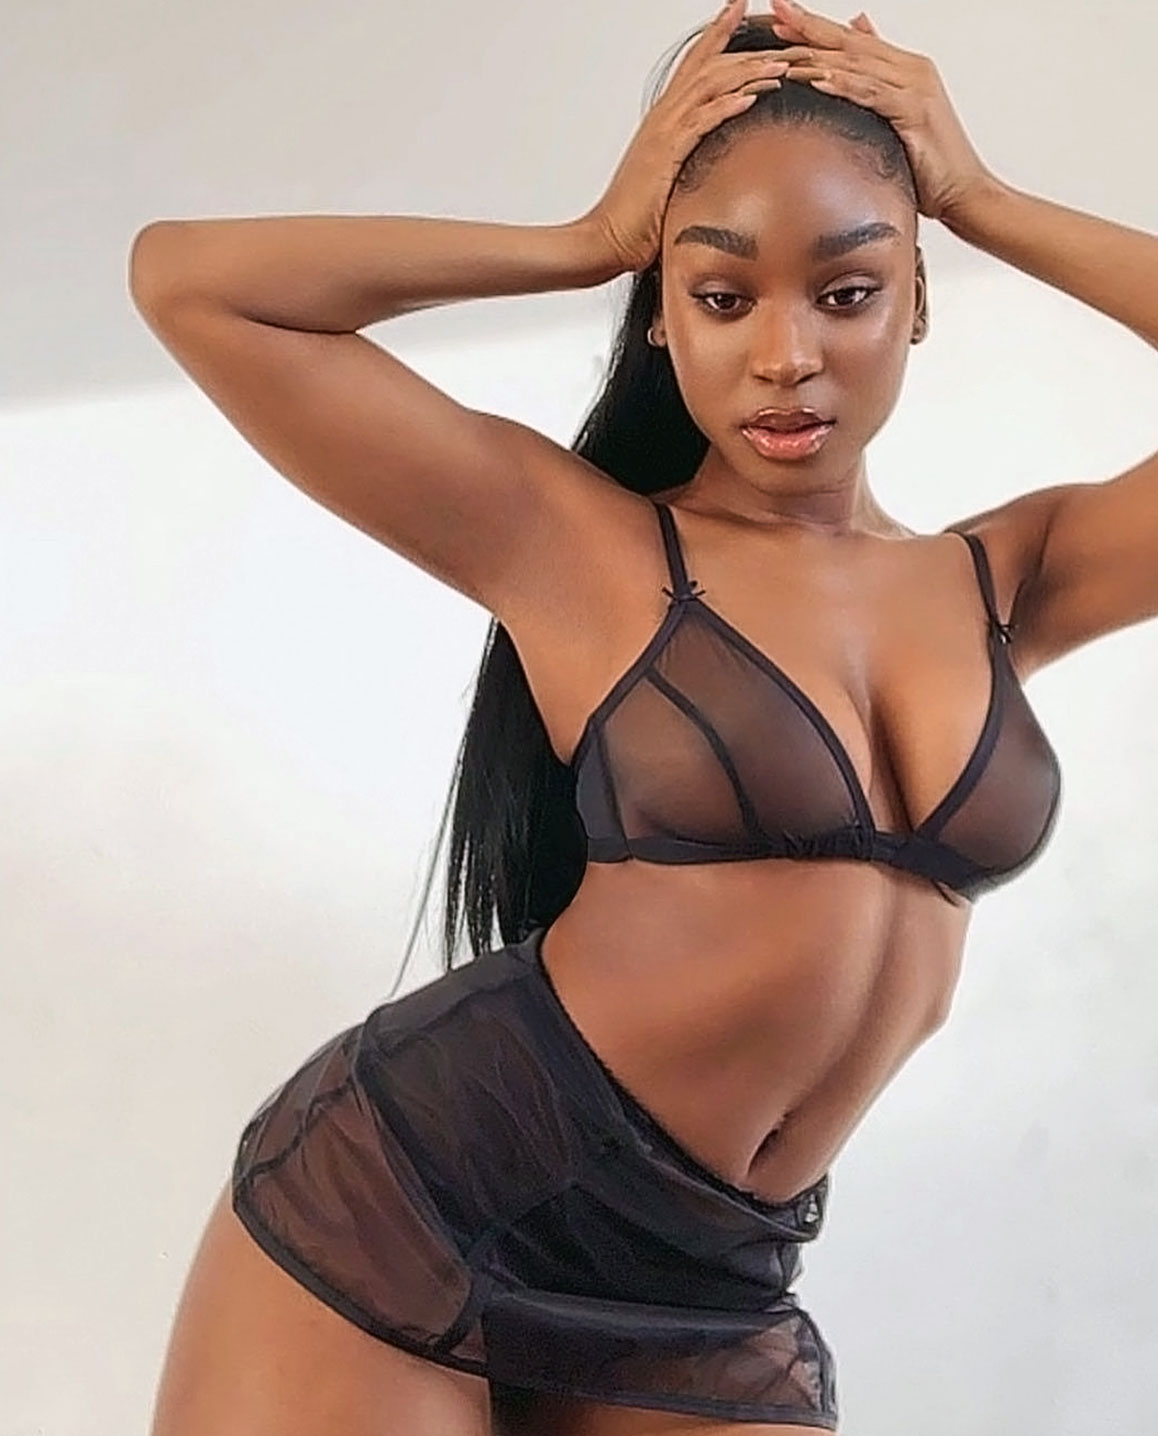 Okay, folks, check out extremely hot singer Normani nude photos, and trust....